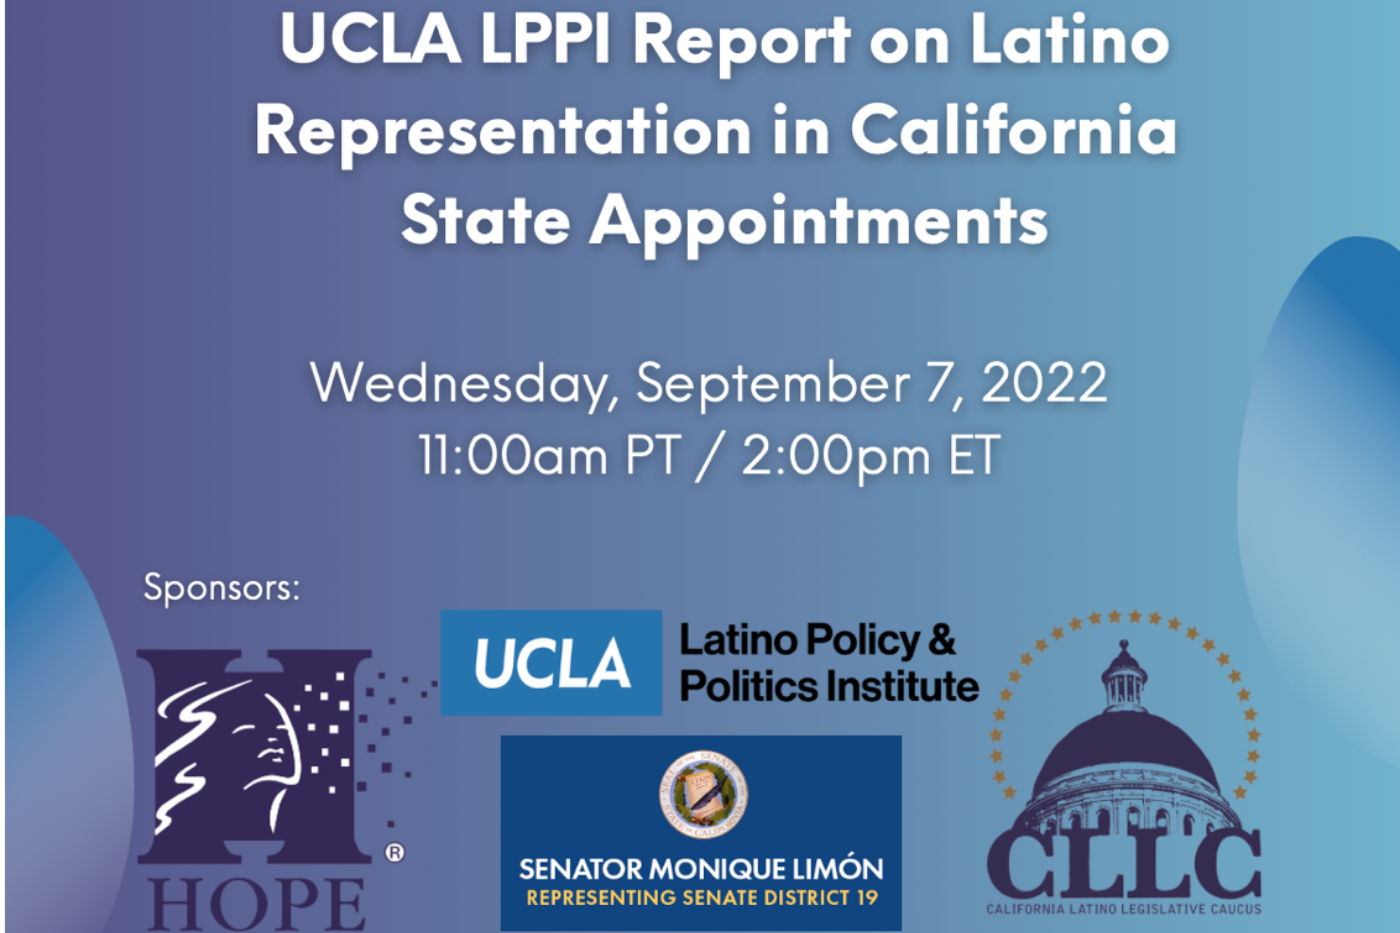 Community Briefing: UCLA LPPI Report on Latino Representation in CA State Appointments